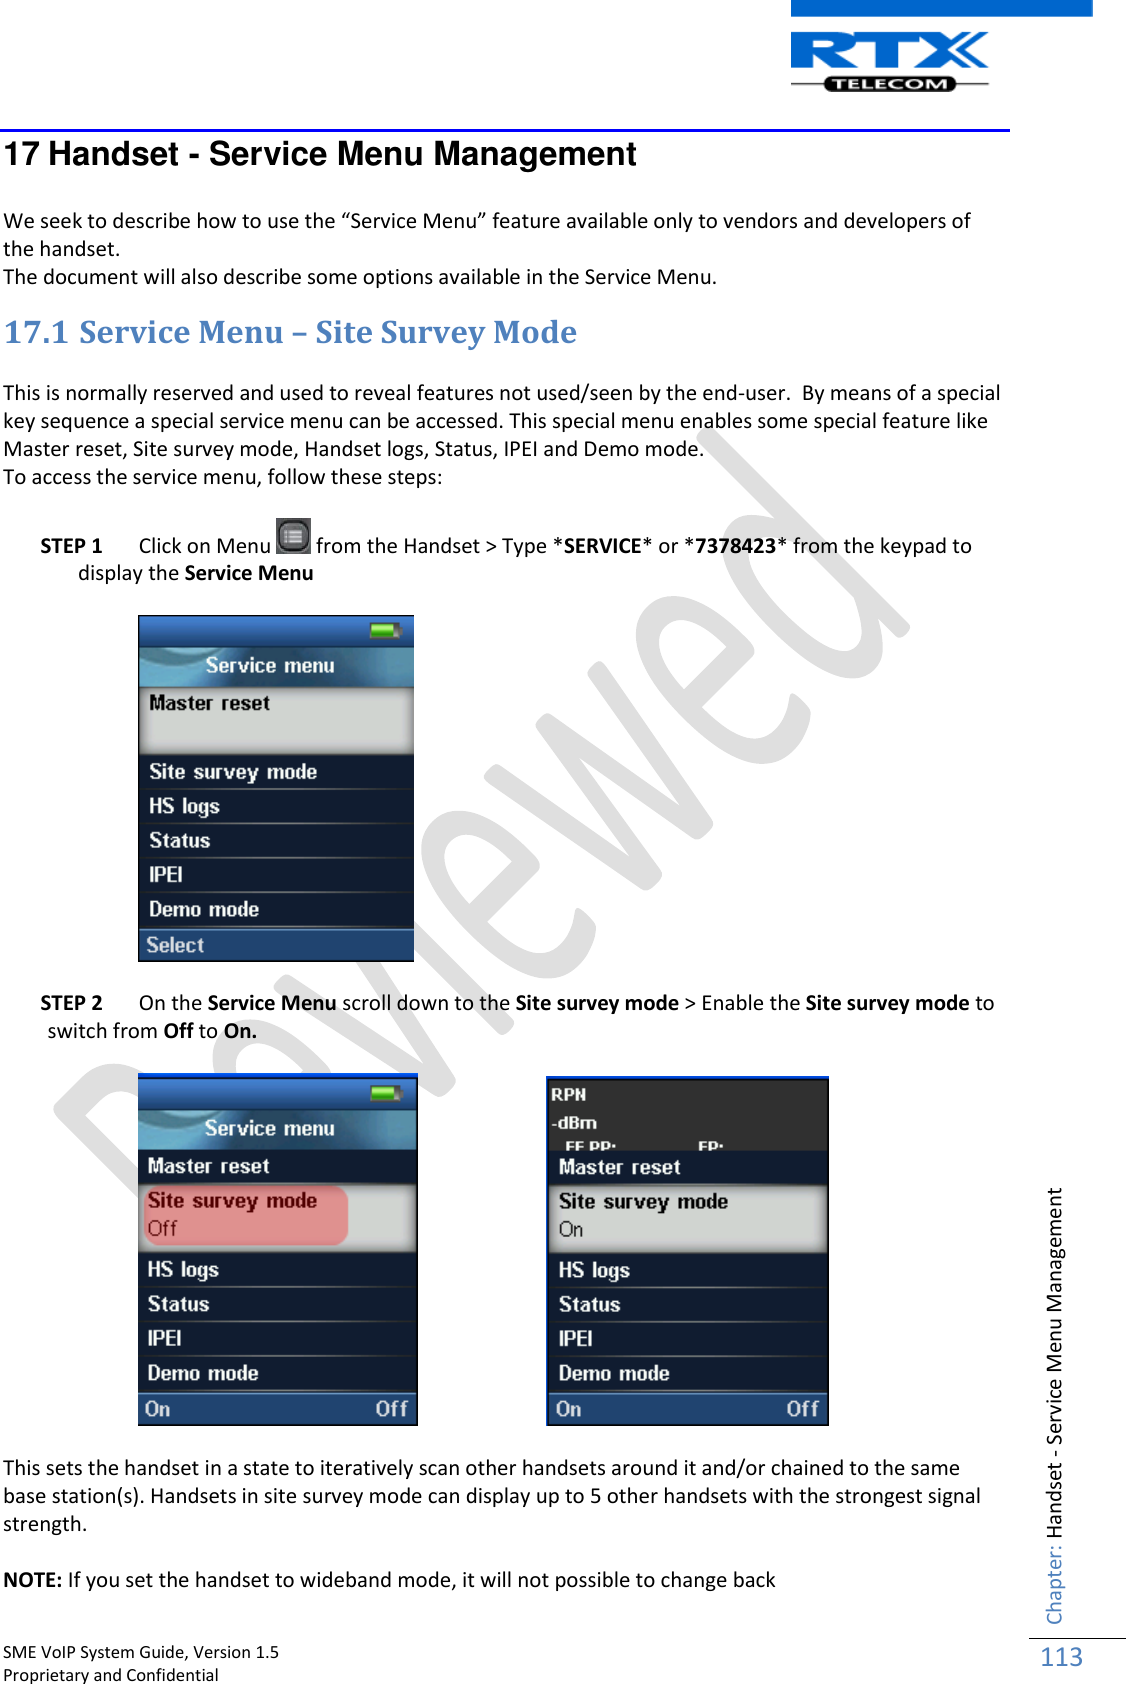    SME VoIP System Guide, Version 1.5                                                                                                                                                          Proprietary and Confidential    Chapter: Handset - Service Menu Management 113  17 Handset - Service Menu Management  We seek to describe how to use the “Service Menu” feature available only to vendors and developers of the handset.  The document will also describe some options available in the Service Menu. 17.1 Service Menu – Site Survey Mode  This is normally reserved and used to reveal features not used/seen by the end-user.  By means of a special key sequence a special service menu can be accessed. This special menu enables some special feature like Master reset, Site survey mode, Handset logs, Status, IPEI and Demo mode. To access the service menu, follow these steps:  STEP 1 Click on Menu   from the Handset &gt; Type *SERVICE* or *7378423* from the keypad to display the Service Menu     STEP 2 On the Service Menu scroll down to the Site survey mode &gt; Enable the Site survey mode to switch from Off to On.              This sets the handset in a state to iteratively scan other handsets around it and/or chained to the same base station(s). Handsets in site survey mode can display up to 5 other handsets with the strongest signal strength.  NOTE: If you set the handset to wideband mode, it will not possible to change back 